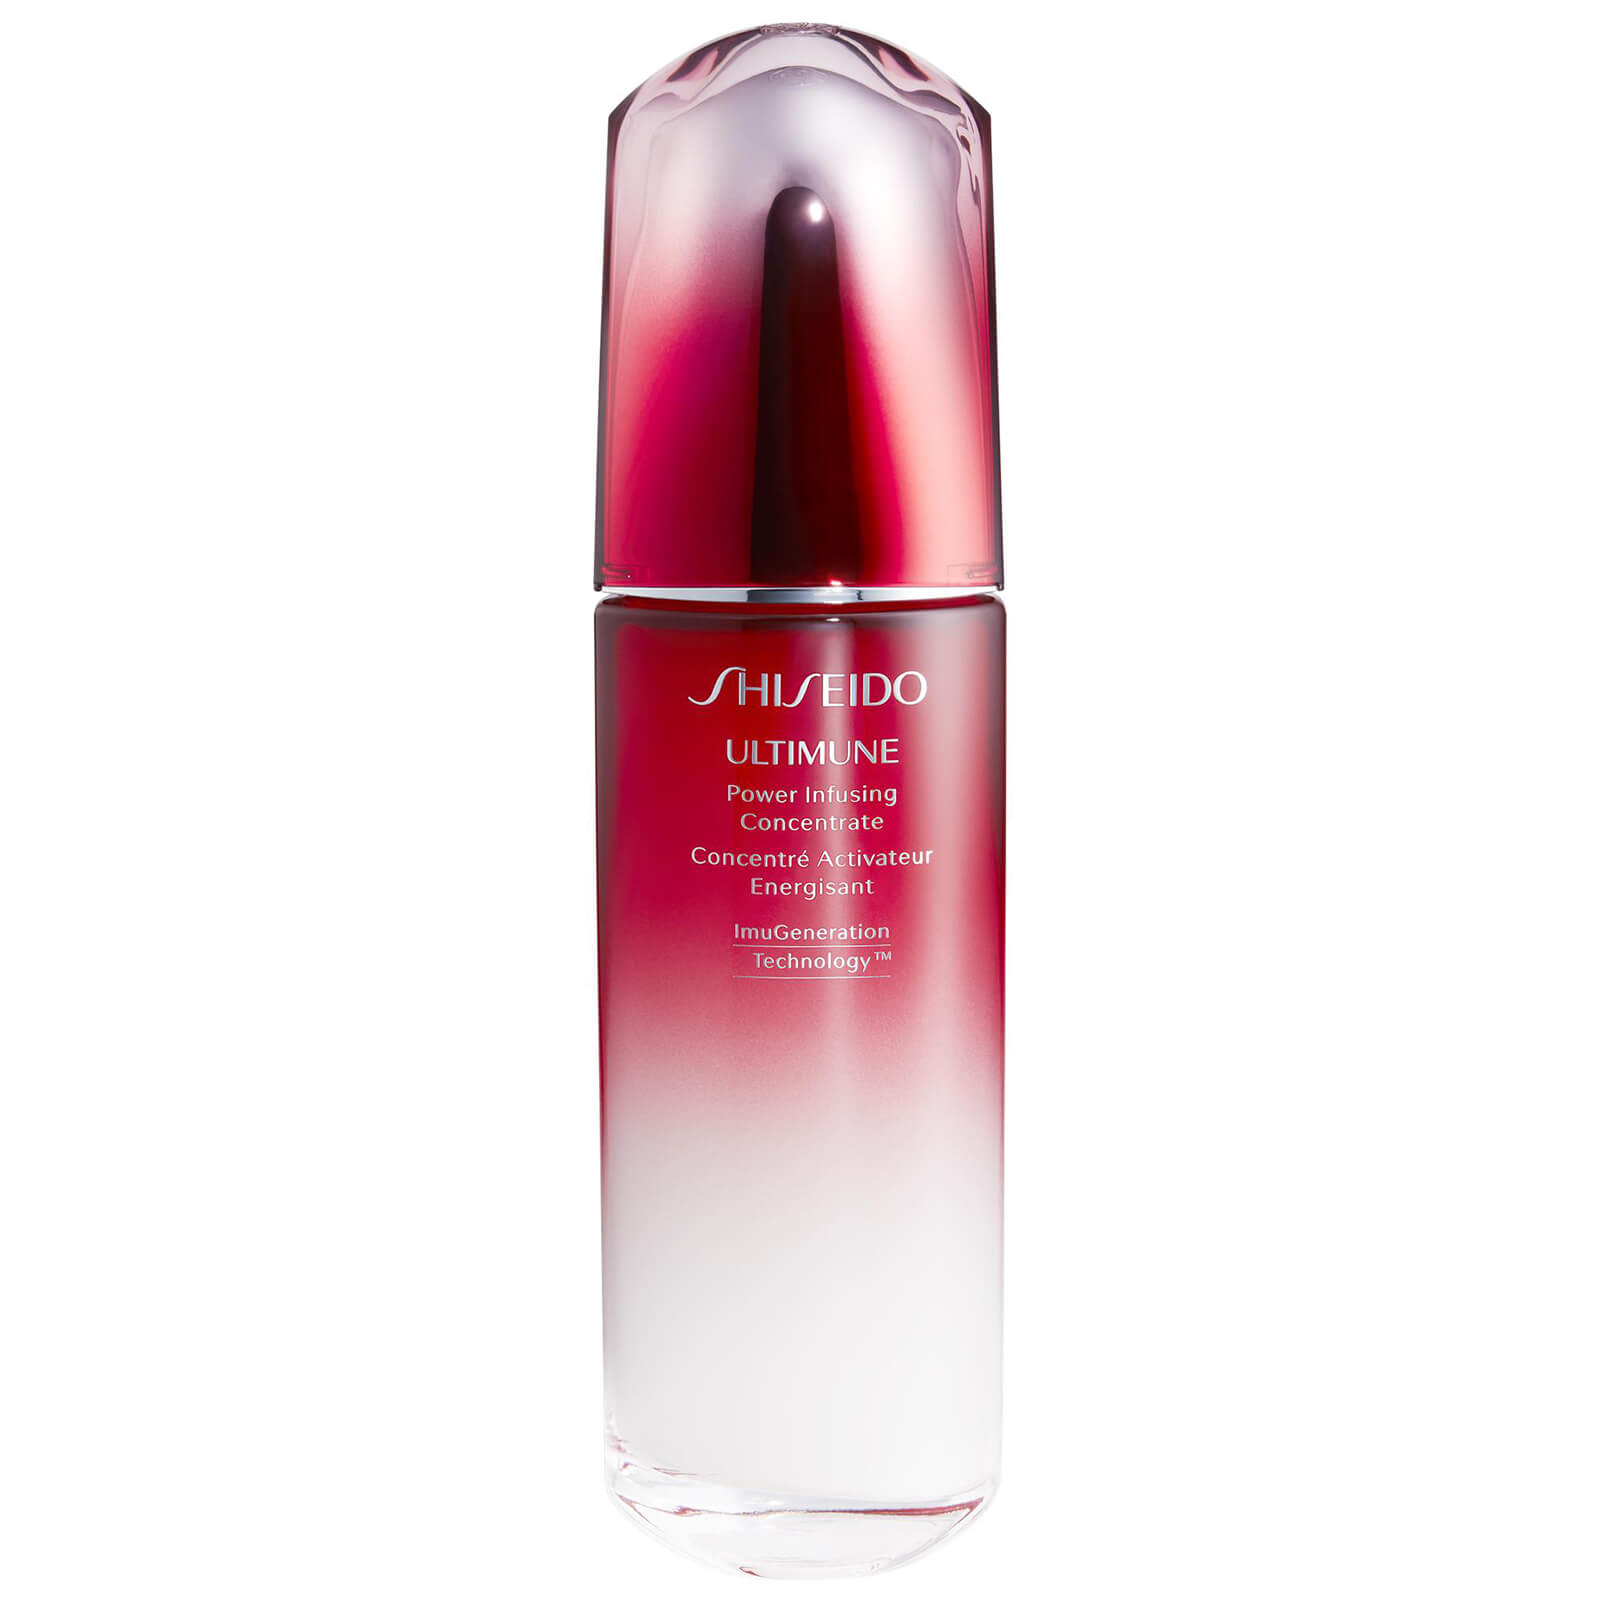 Shiseido Exclusive Ultimune Power Infusing Concentrate 120ml